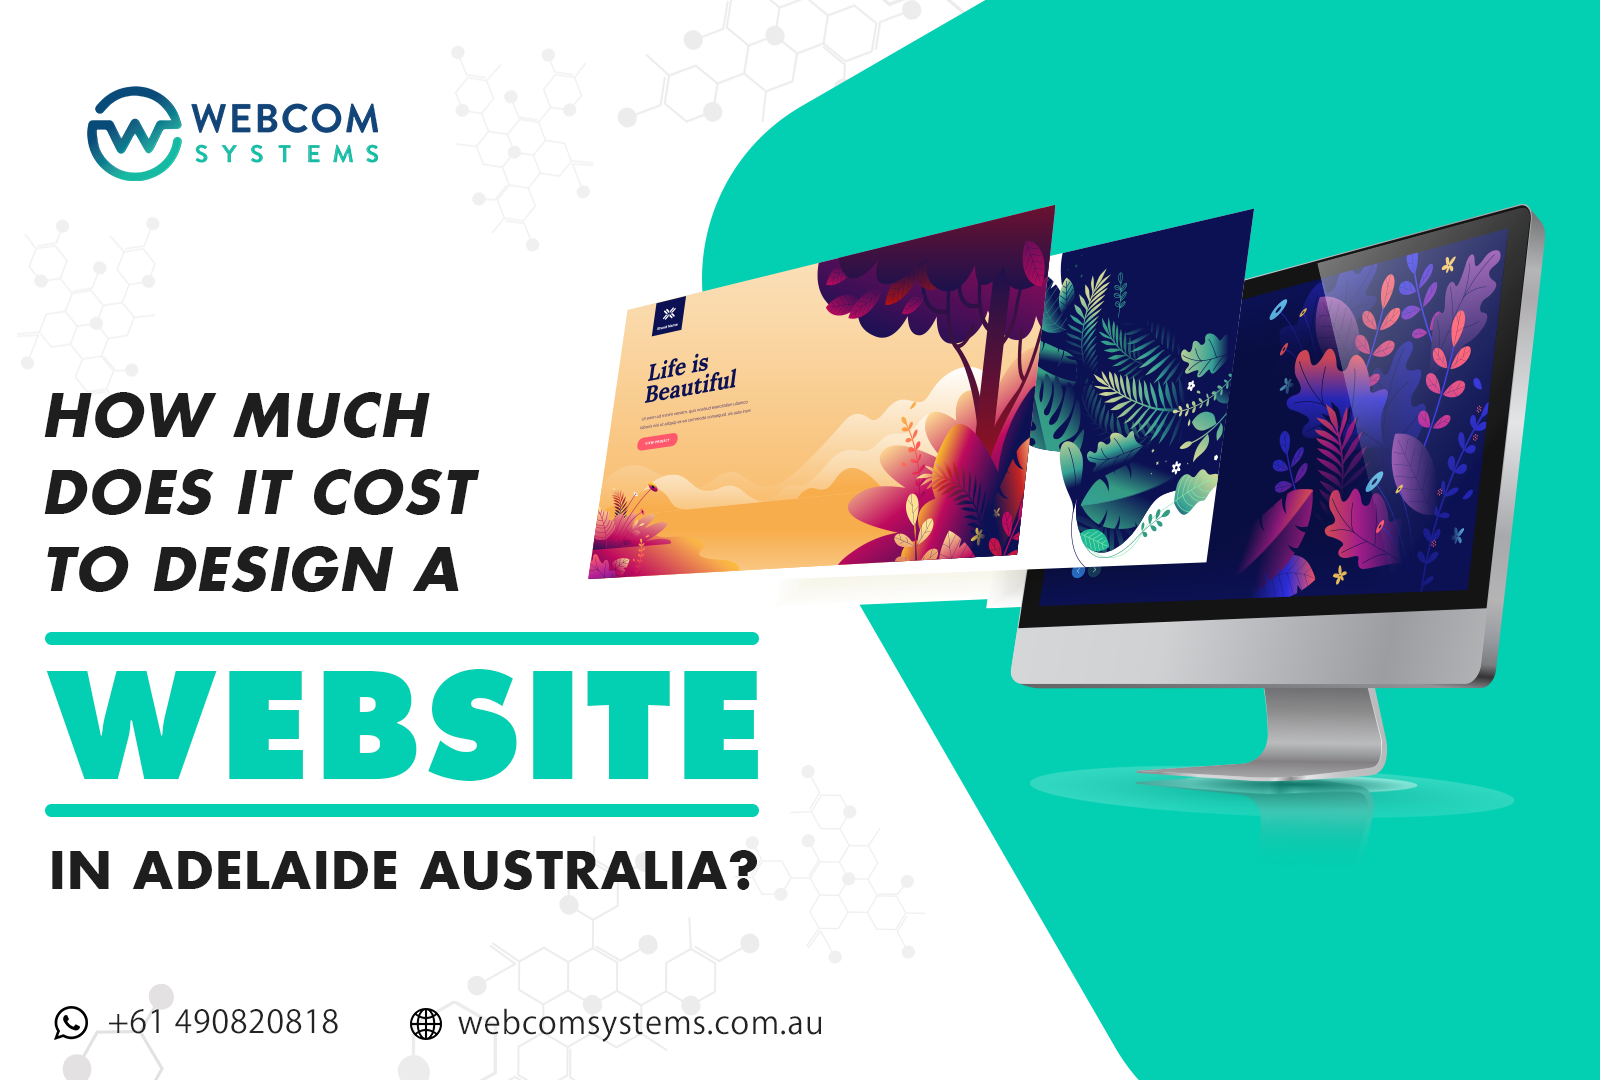 How Much Does It Cost To Design A Website In Adelaide Australia?